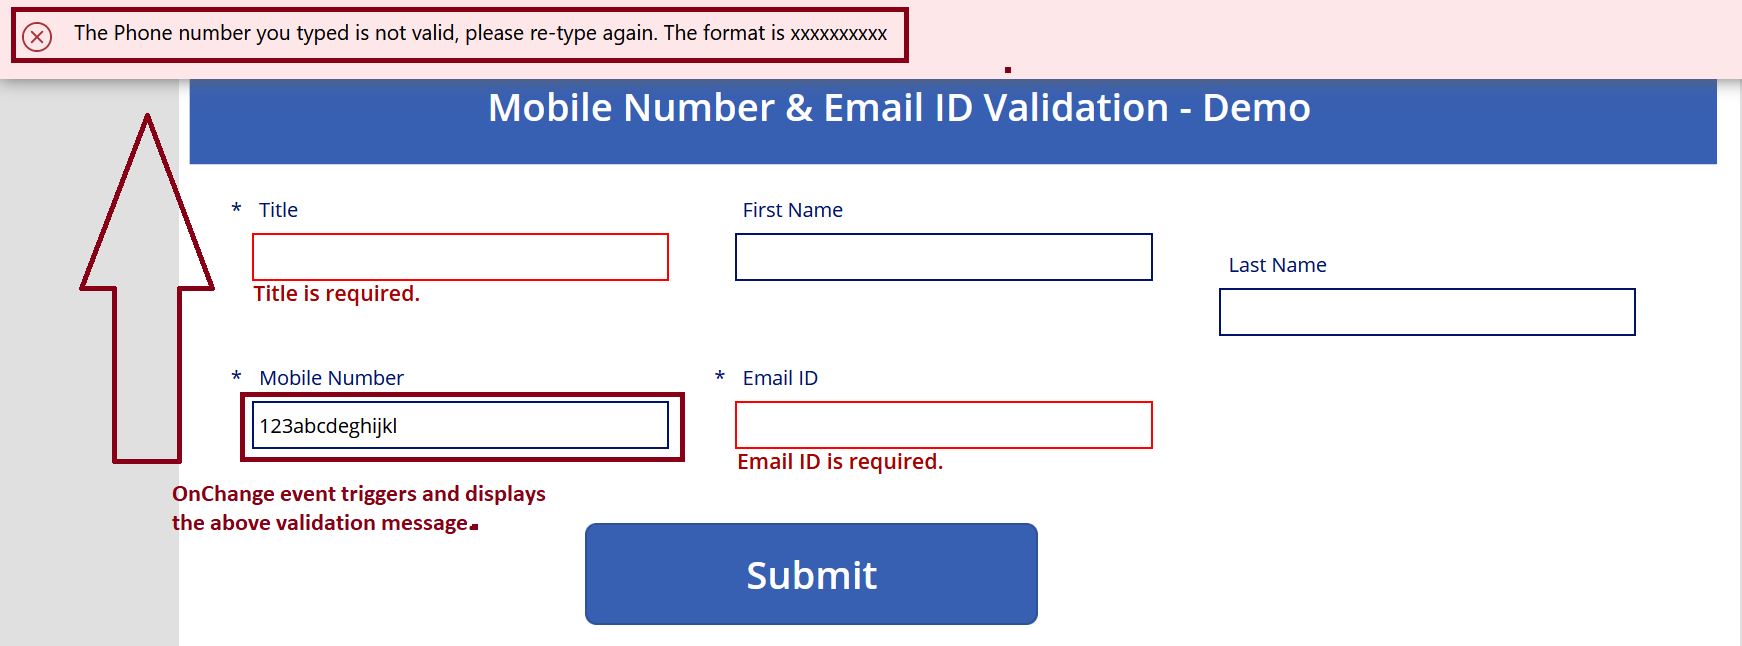 Phone number validation demo in PowerApps